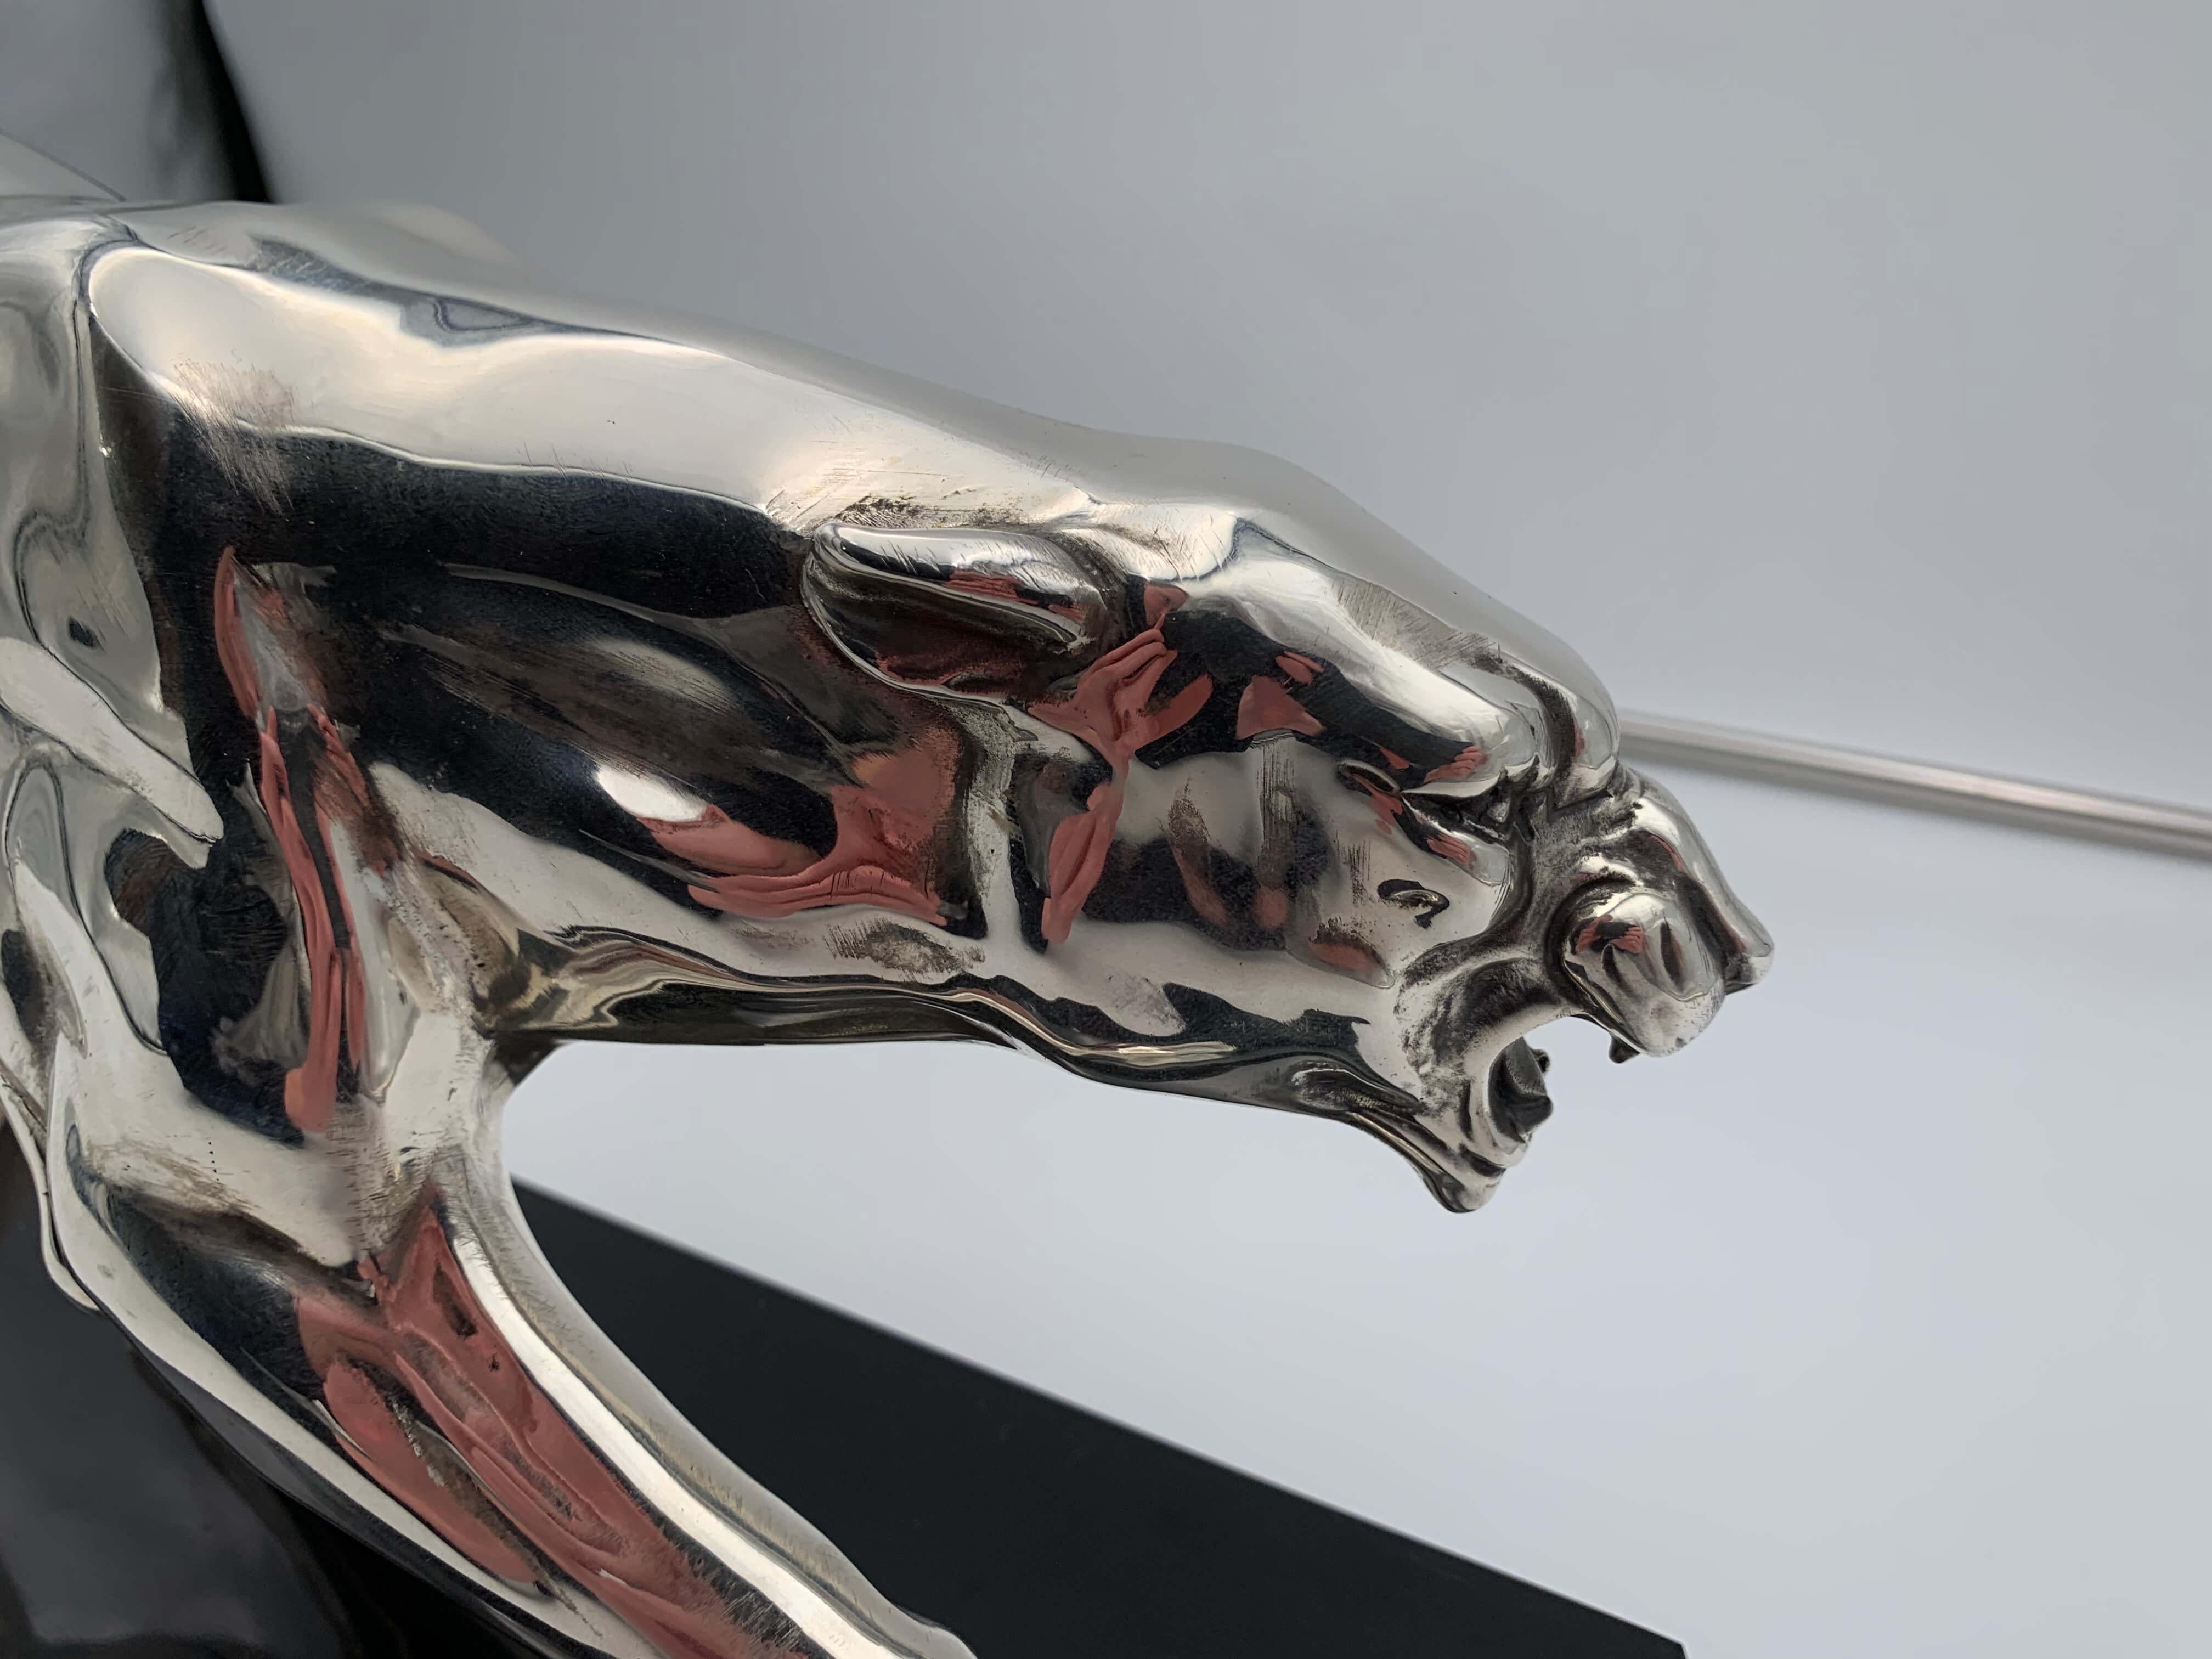 Walking Panther Sculpture, Silver-Plate, Marble, France, circa 1930 For Sale 1